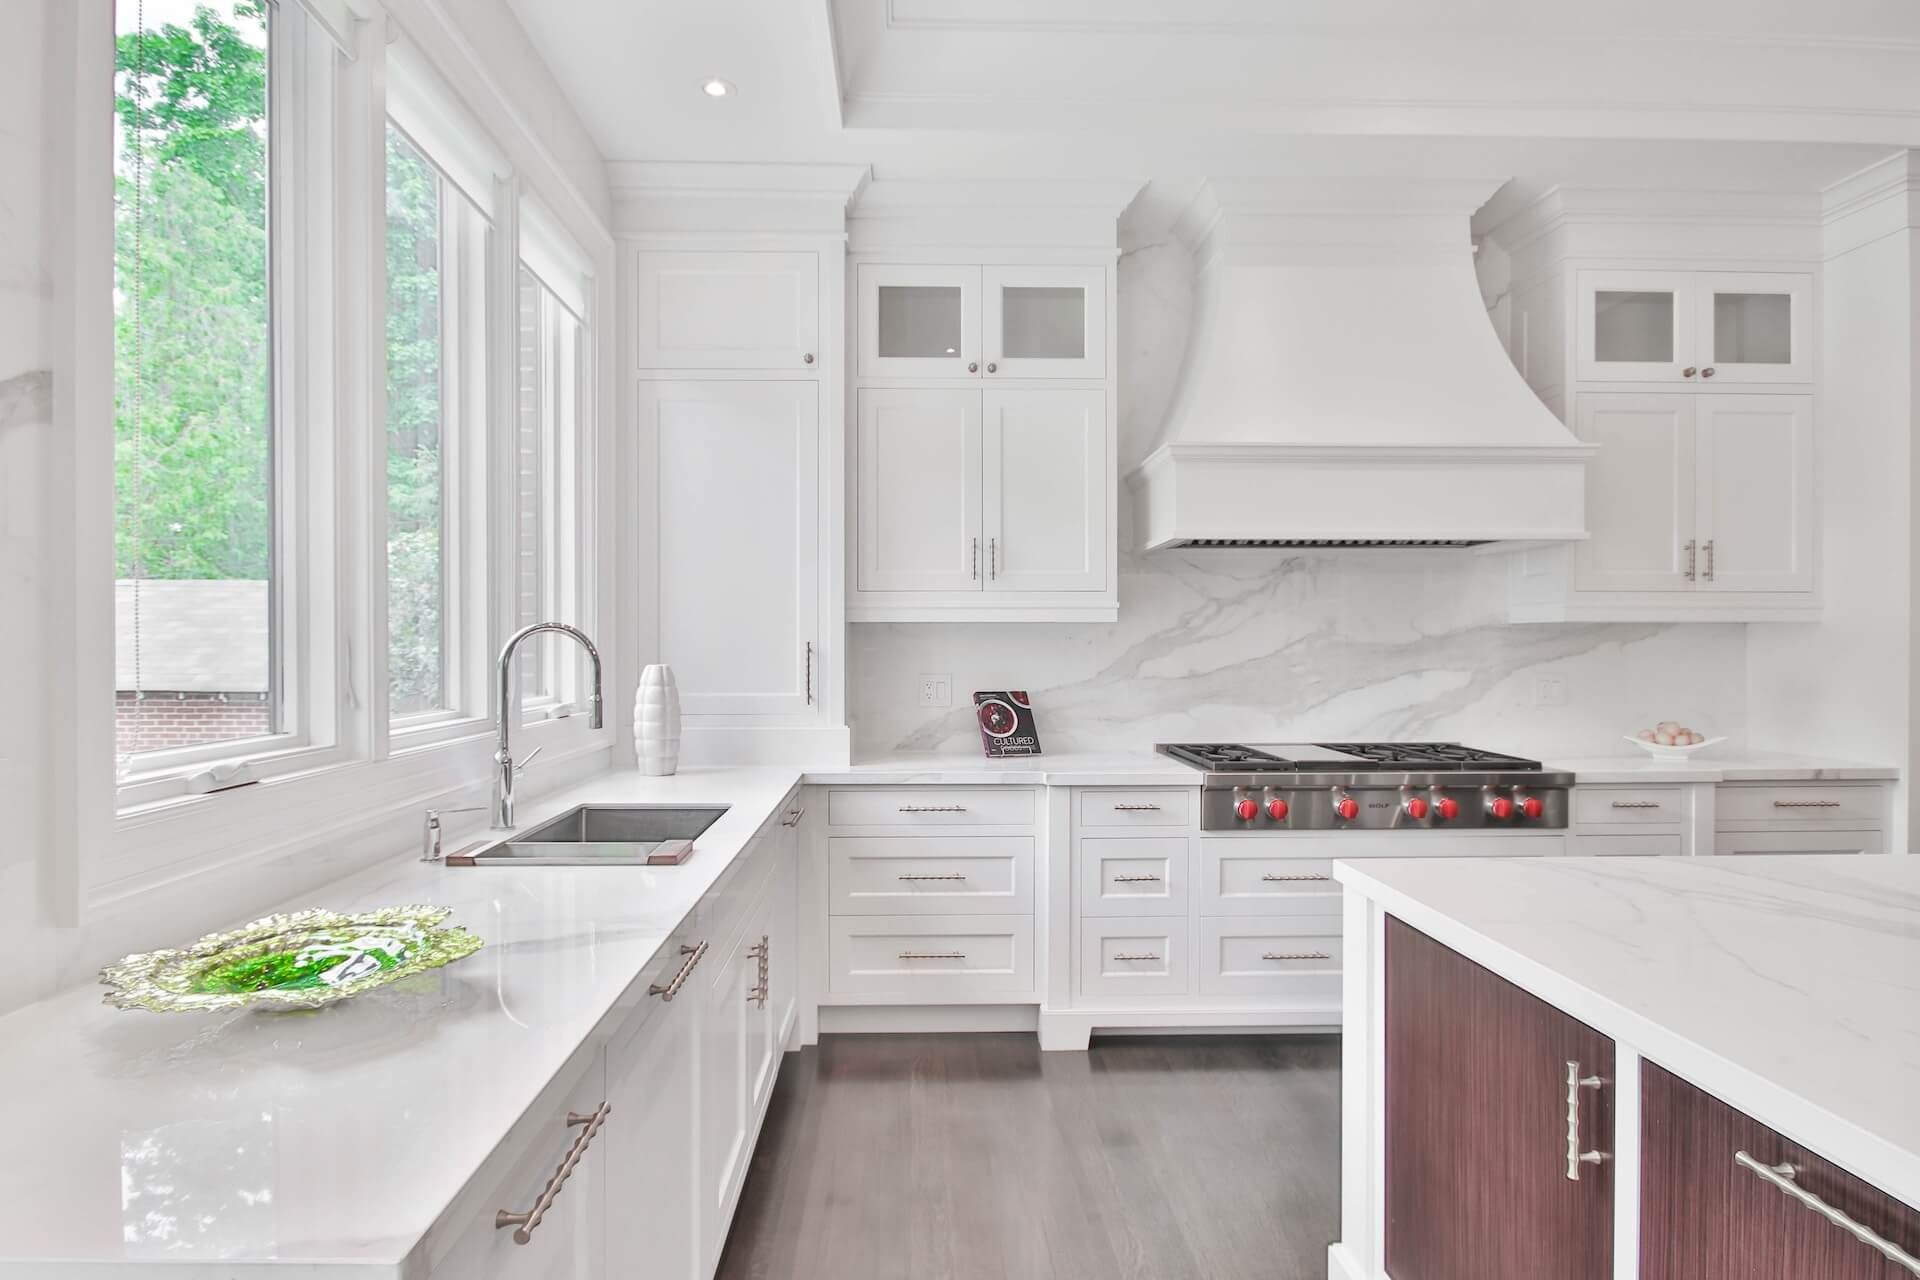 Here's why shaker cabinets are so popular today